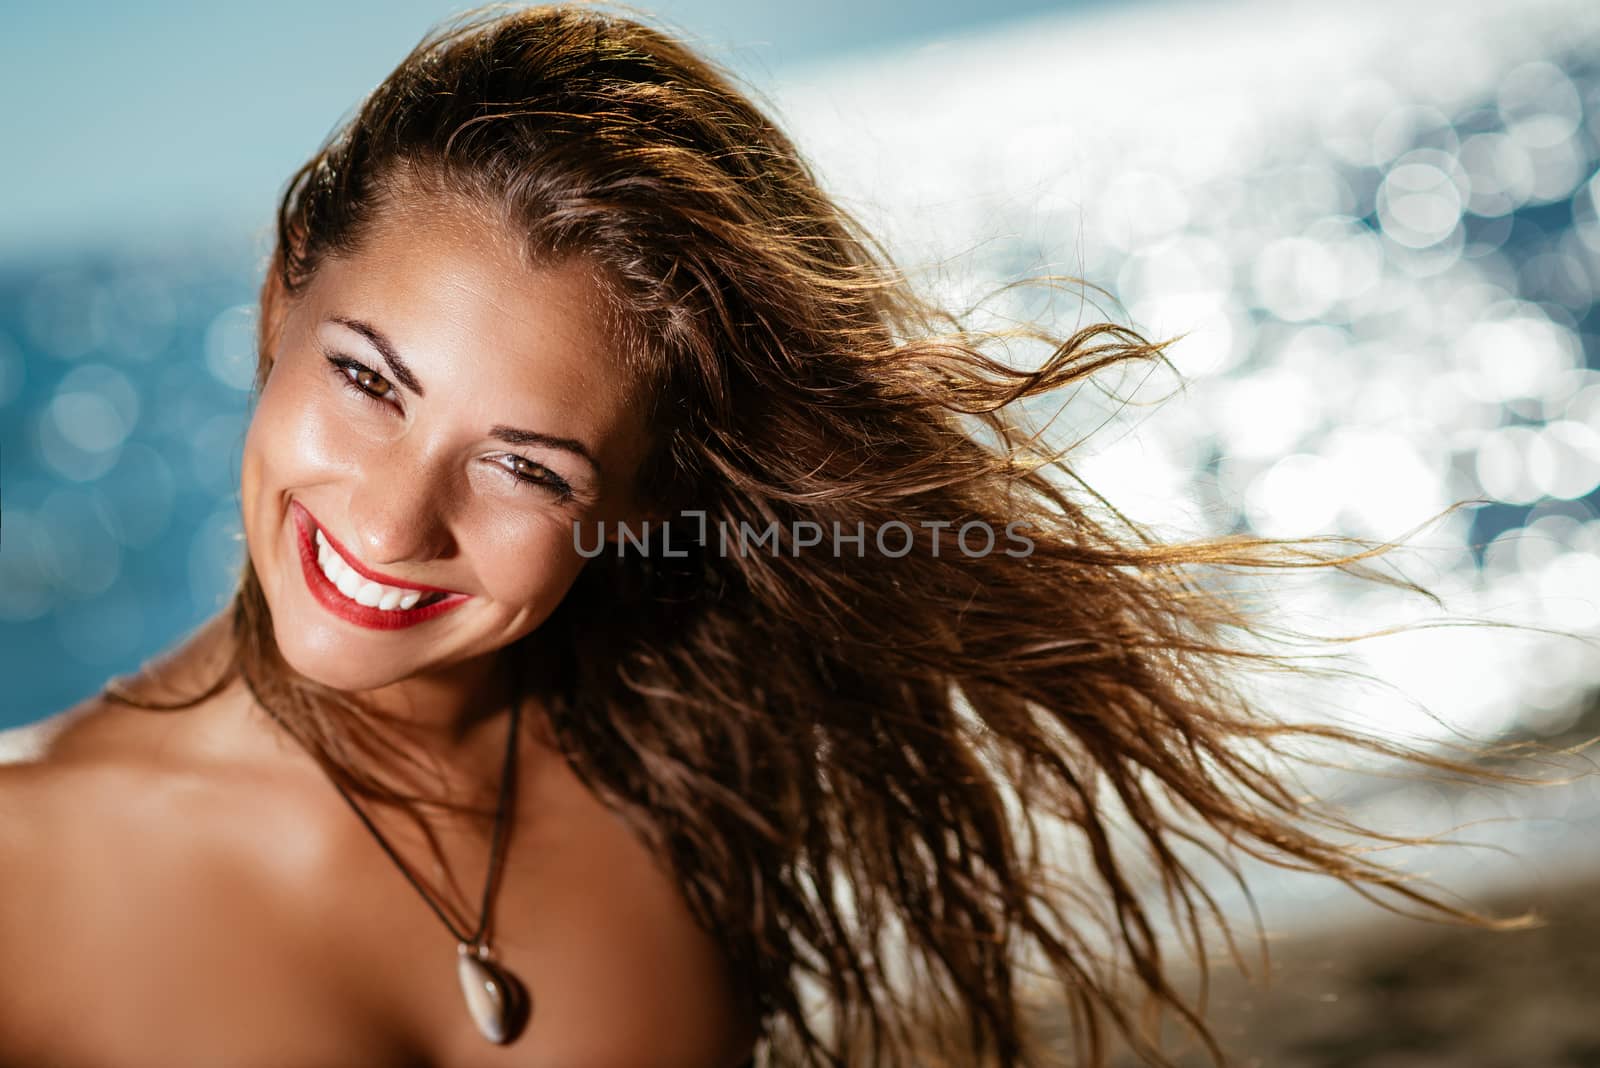 Portrait of a beautiful young woman enjoying on the beach. She is smiling and looking at camera.